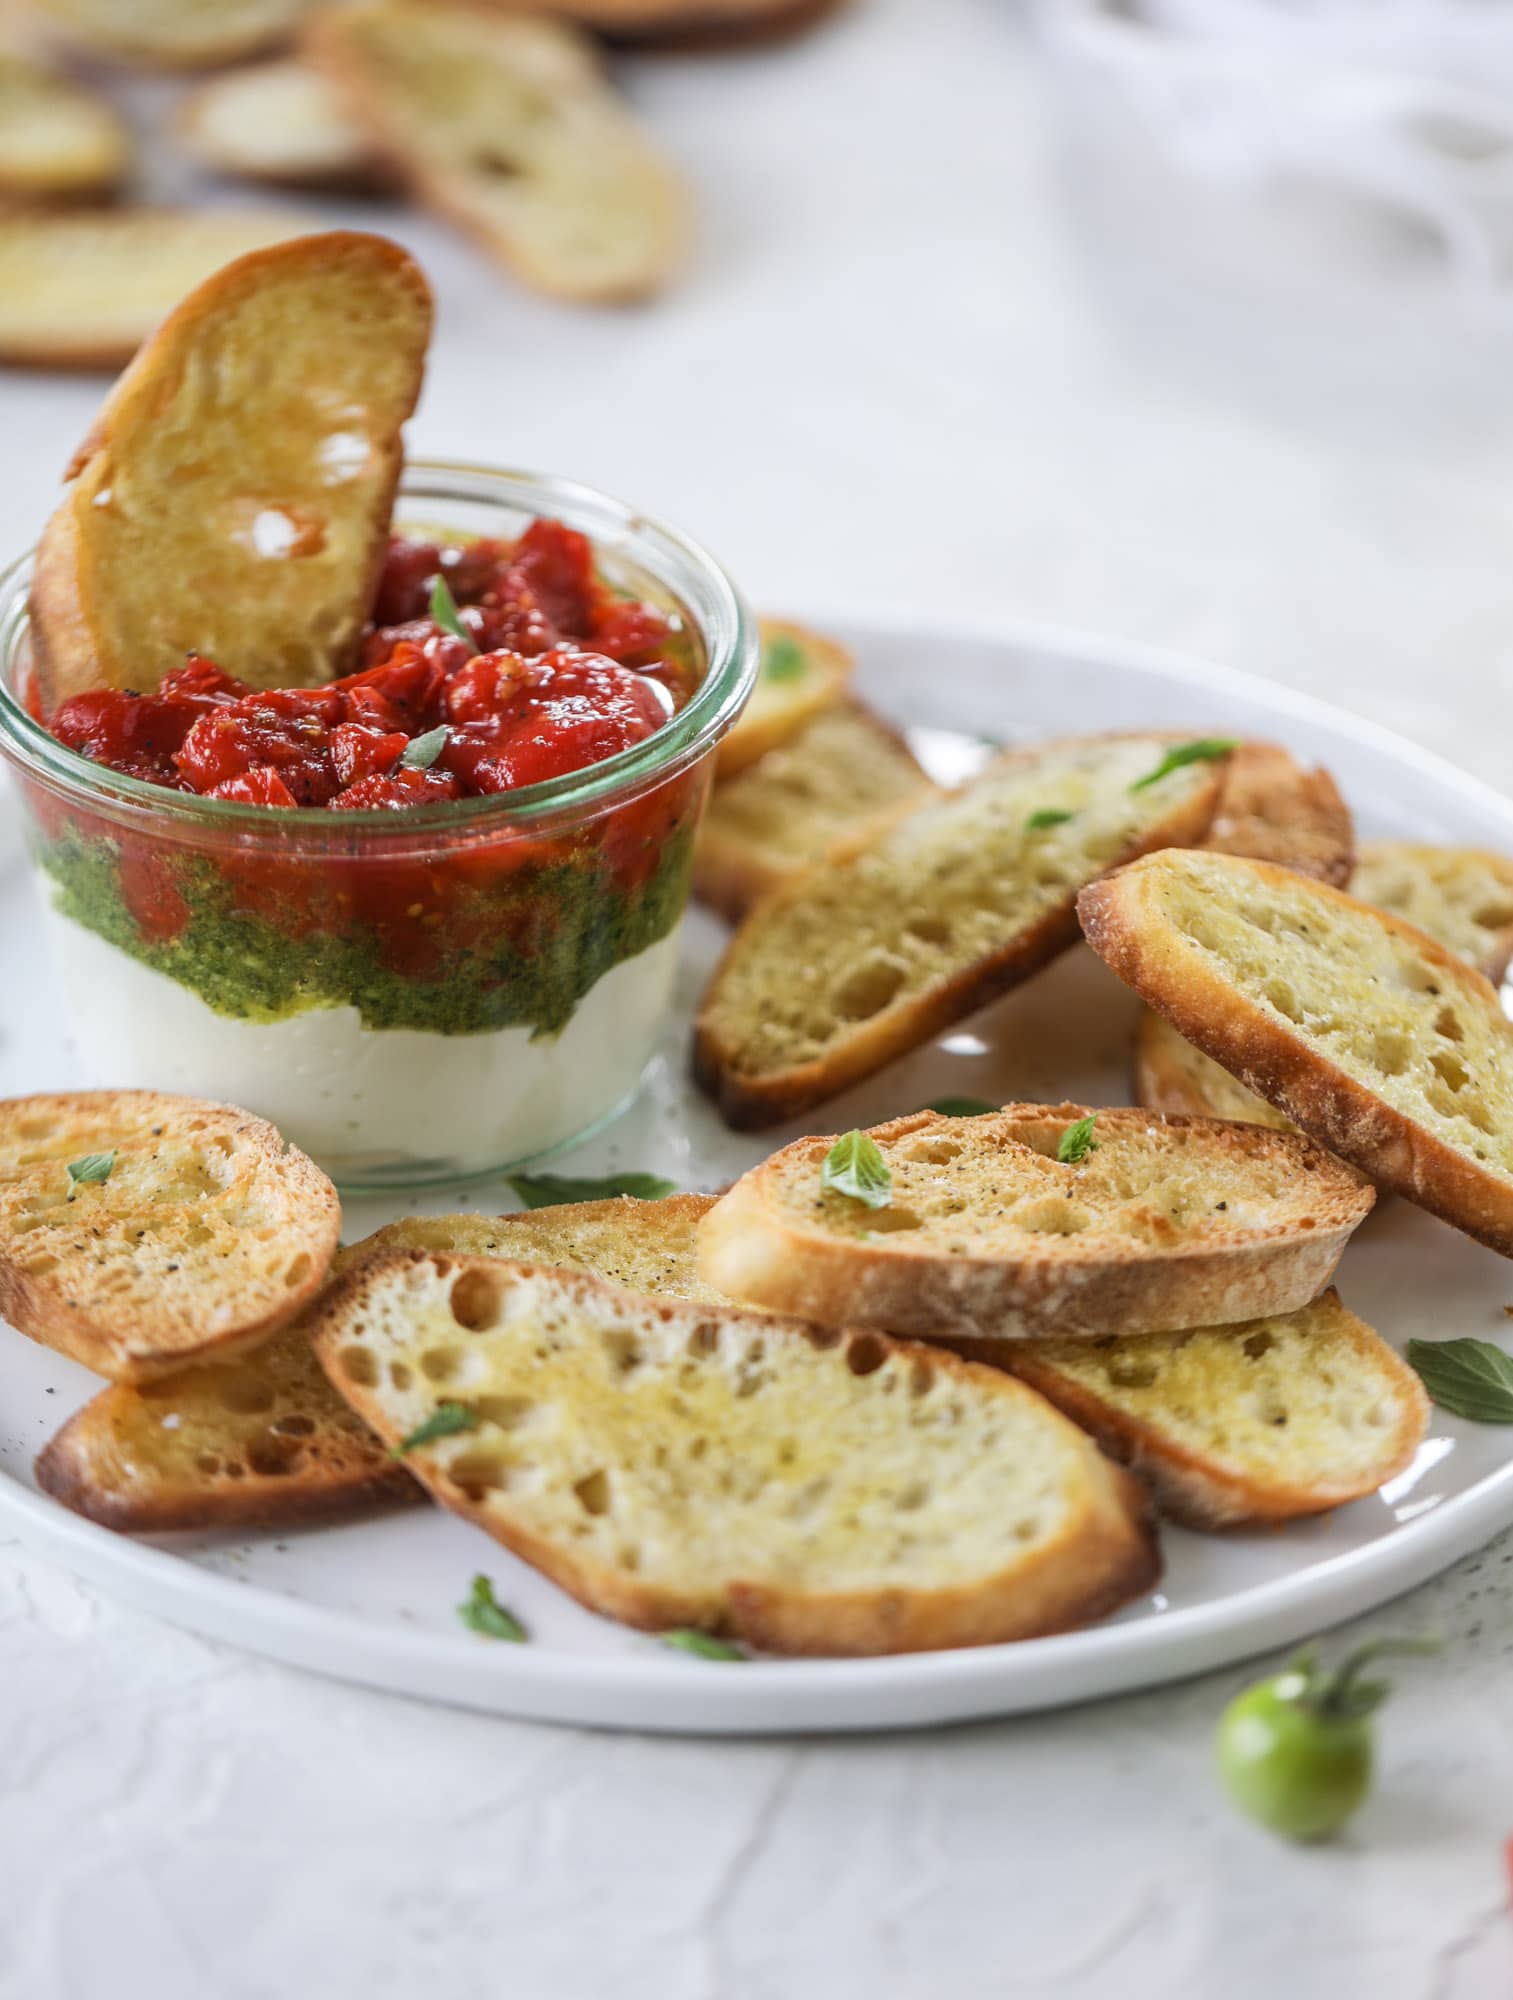 This ricotta jam jar is the perfect appetizer and snack to serve at a party! Based on the ricotta jam jar served at Nordstrom Cafe, it starts with creamy ricotta, is topped with flavorful basil pesto and a quick tomato jam. Serve with crunchy bread and dip dip dip! I howsweeteats.com #ricotta #jam #jar #nordstrom #tomato #pesto #appetizer #dip